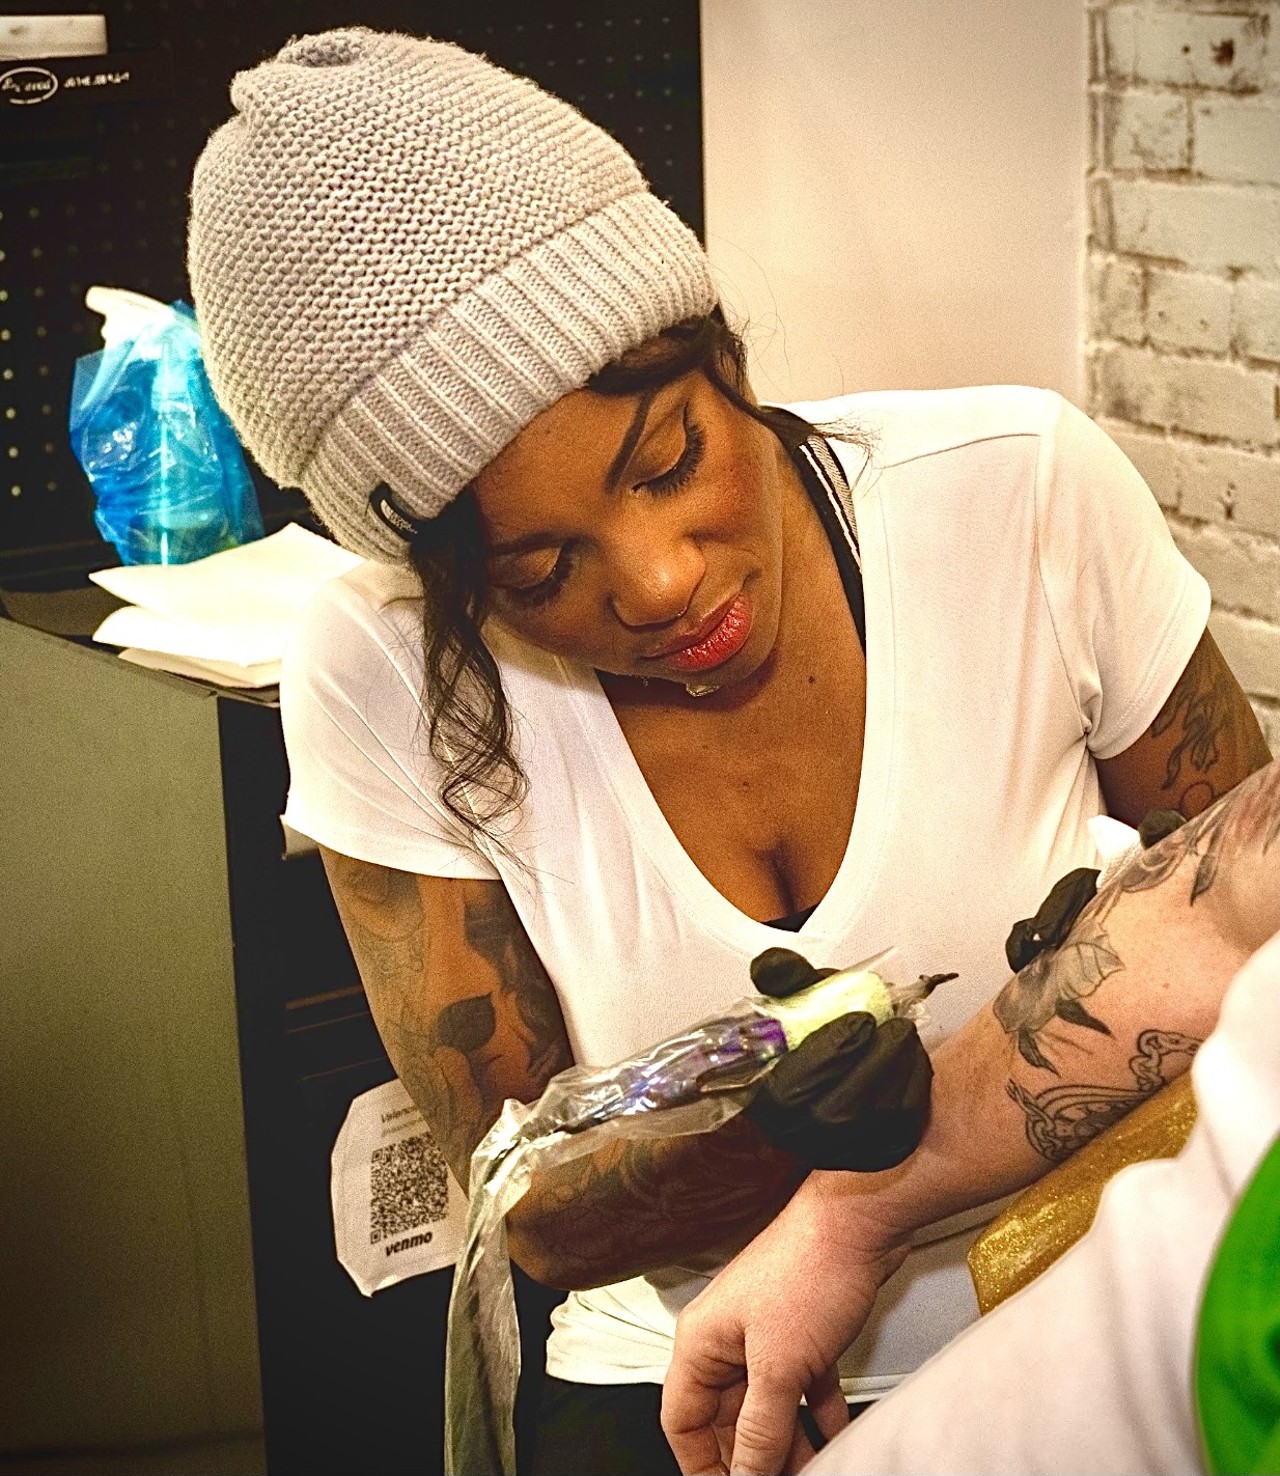 Valencia Miller
The bubbly Miller, who can boast of being the first Black woman to own a tattoo shop in the city, brought her shop to Lafayette Square in 2021. She's known for her portraits, floral and all-organic subject matter.
Shop details: Onyx Dagger (1917 Park Avenue, text or call 314-745-8641); open 11 a.m. to 7 p.m. Tuesday through Sunday
Appointments or Walk-ins: Appointment only
Years tattooing: Over 16 years
Specialty: Black and gray realism, fine line, portraiture, floral and organic subject matter
To note:
Will take on different tattoo styles
No face tattoos
No minors
$$$: Minimum ranges from $150 to $300 depending on the artist
Best way to contact: Shop&rsquo;s website